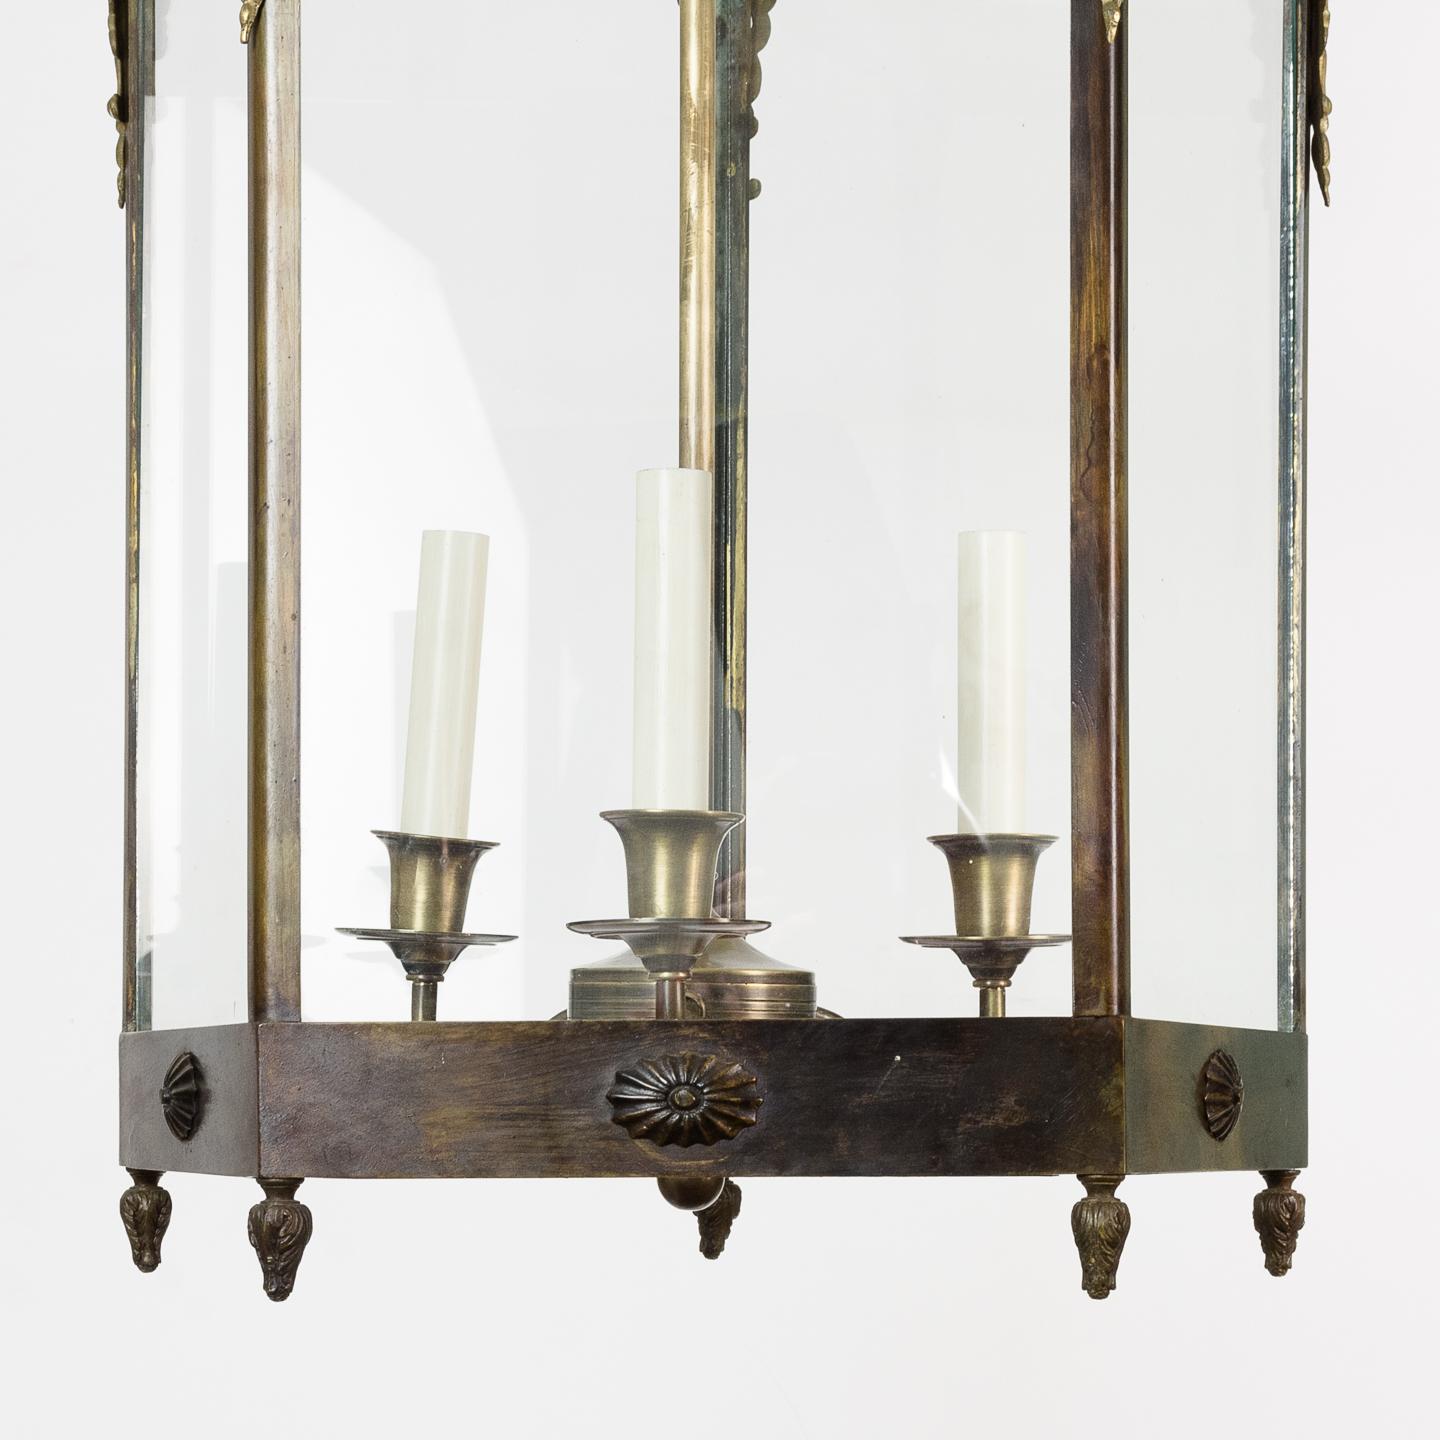 Bronze 19th Century French Empire Style Hall Lantern For Sale